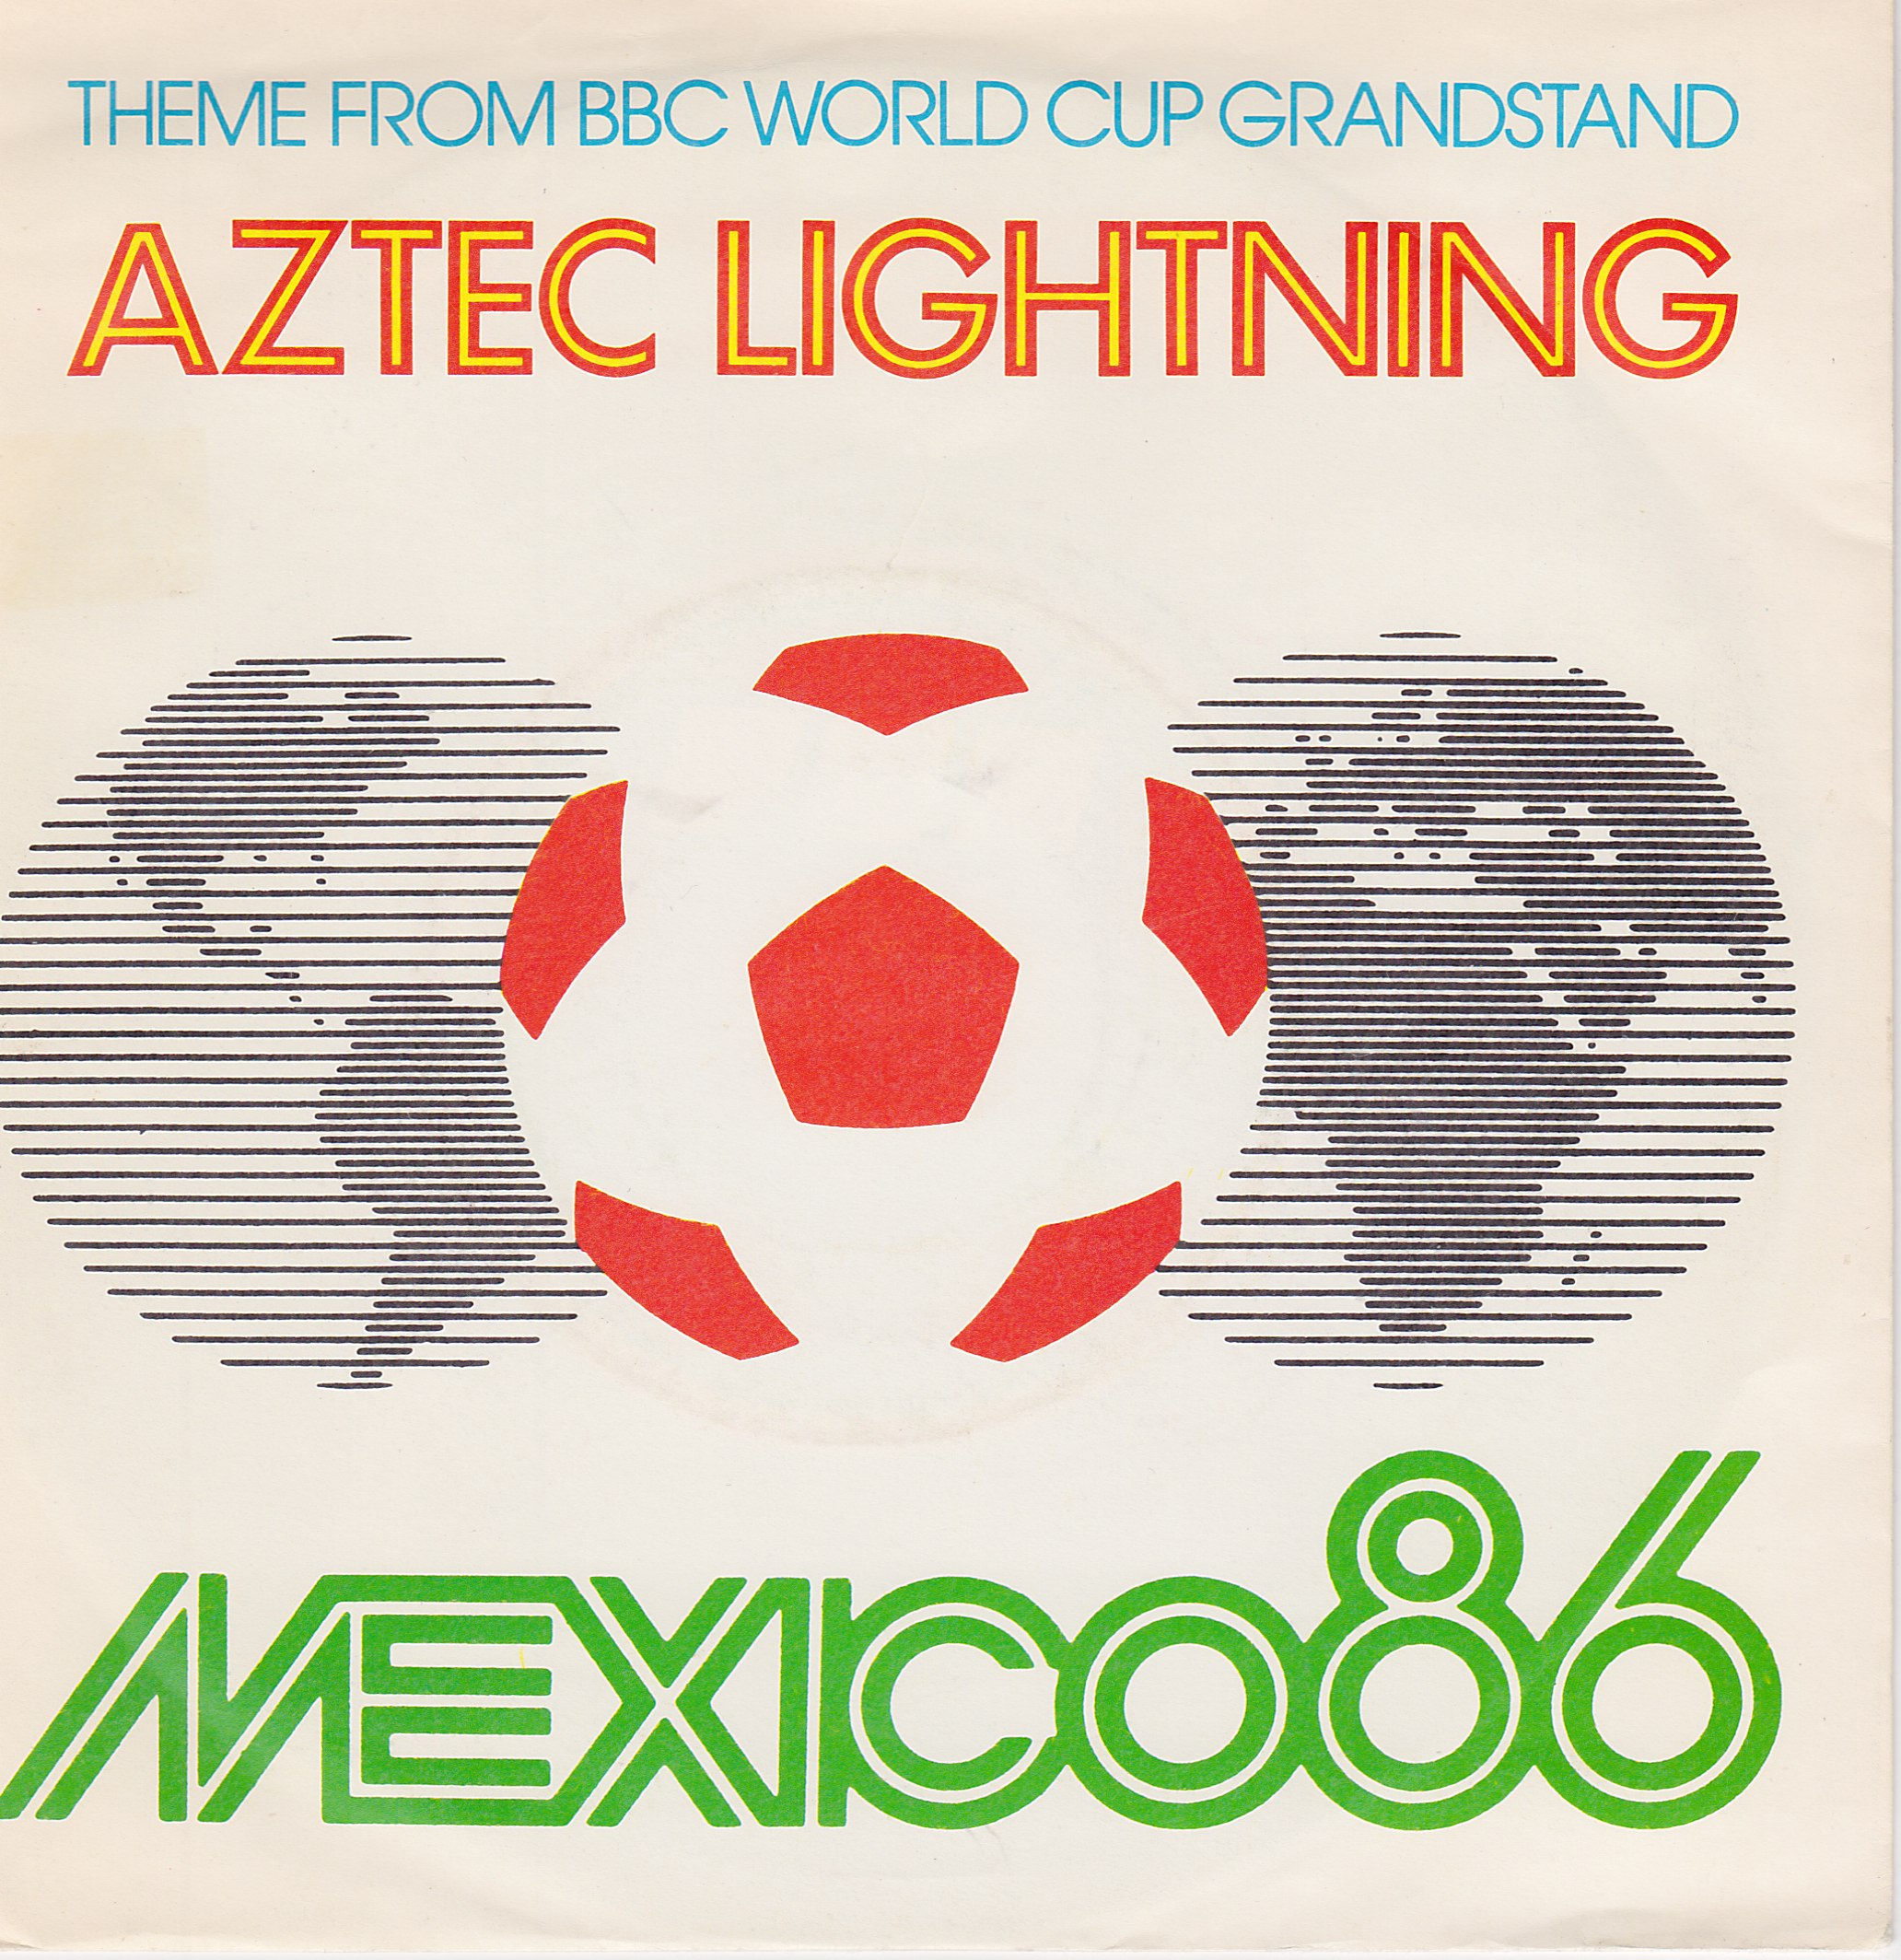 Picture of Aztec lightning (World cup grandstand '86) by artist Heads from the BBC singles - Records and Tapes library